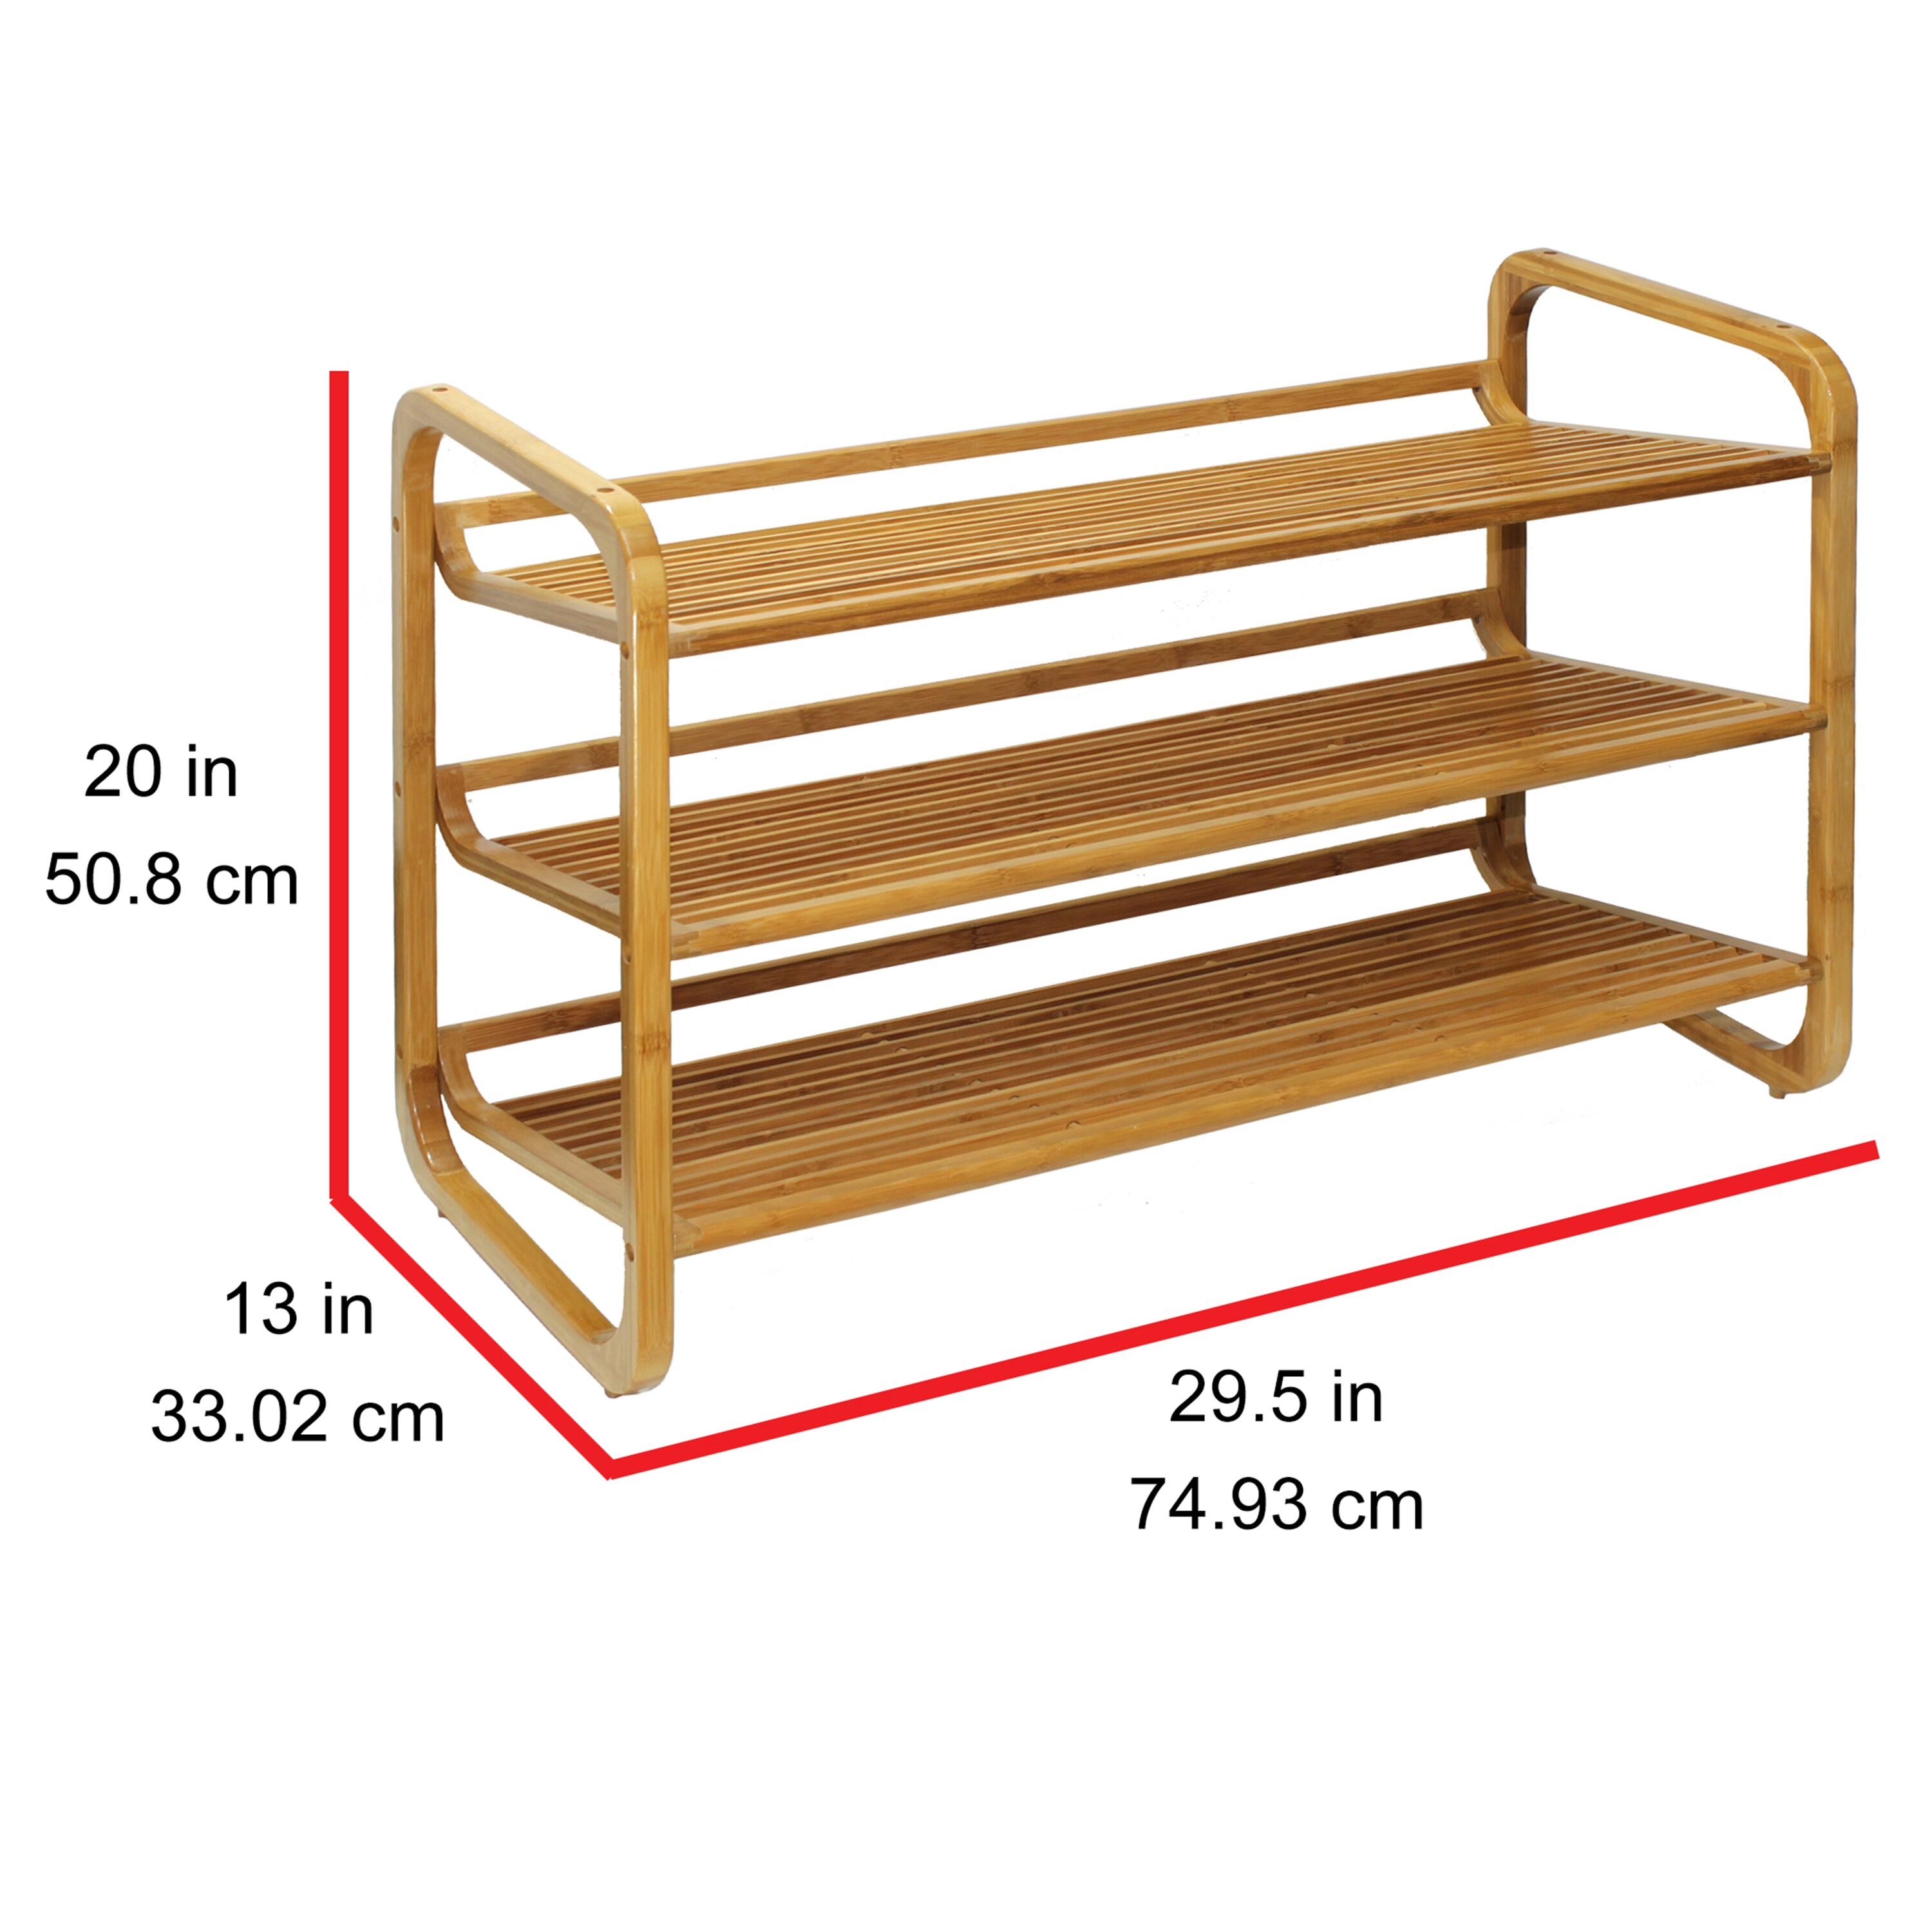 Oceanstar 3 Tier Brown Wood Shoe Rack - Holds 12 Pairs of Shoes -  Freestanding & Stackable - Carbonized Bamboo Finish